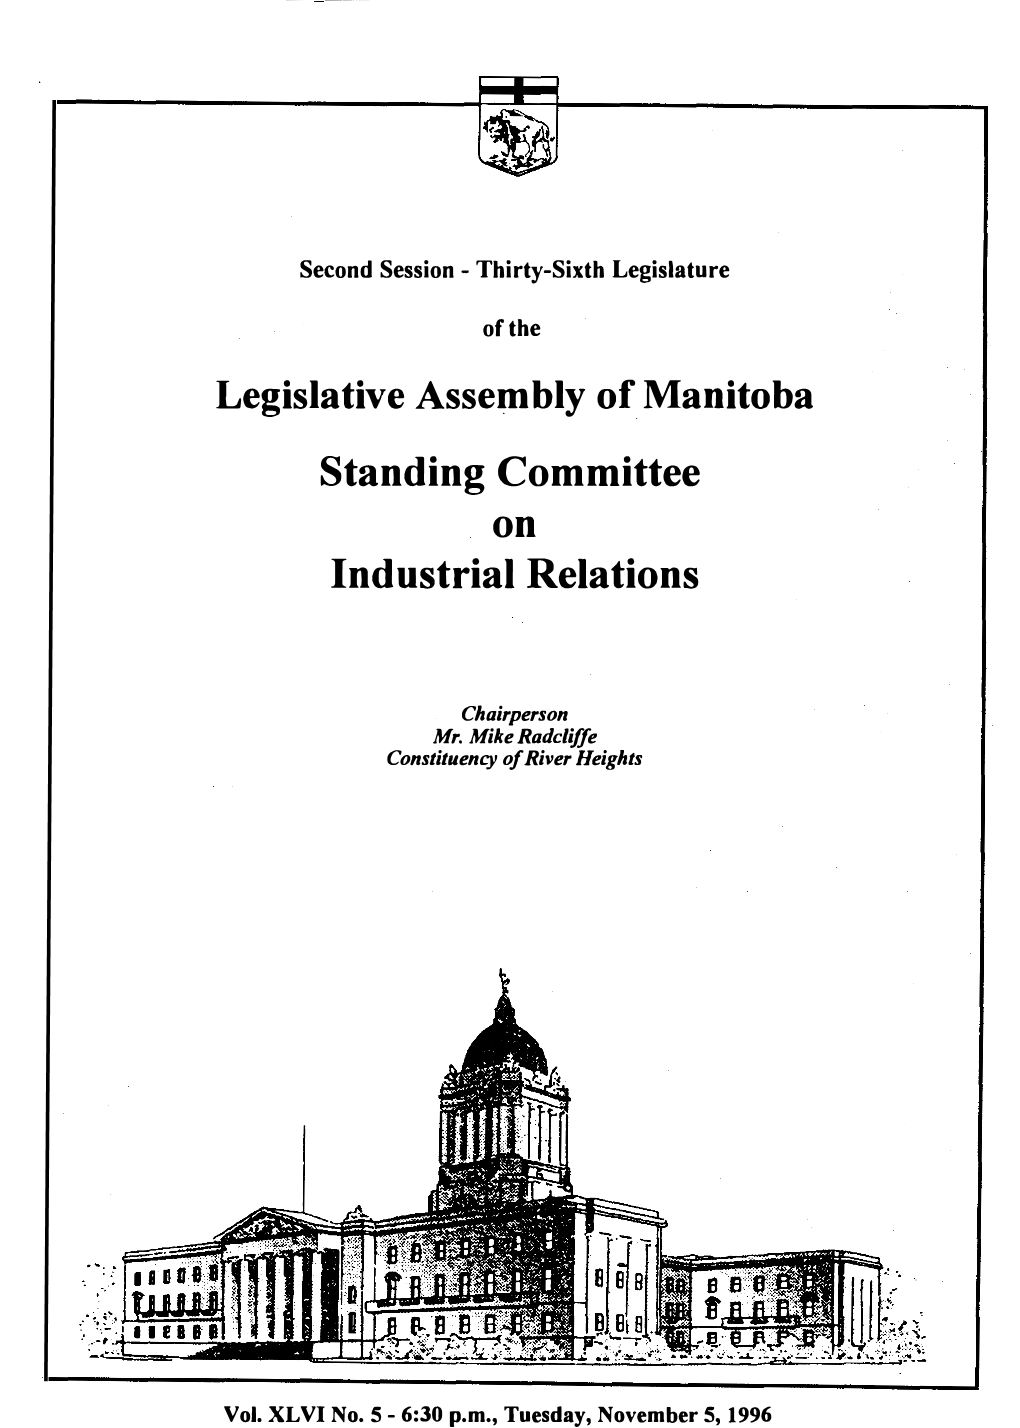 Legislative Assembly of Manitoba Standing Committee on Industrial